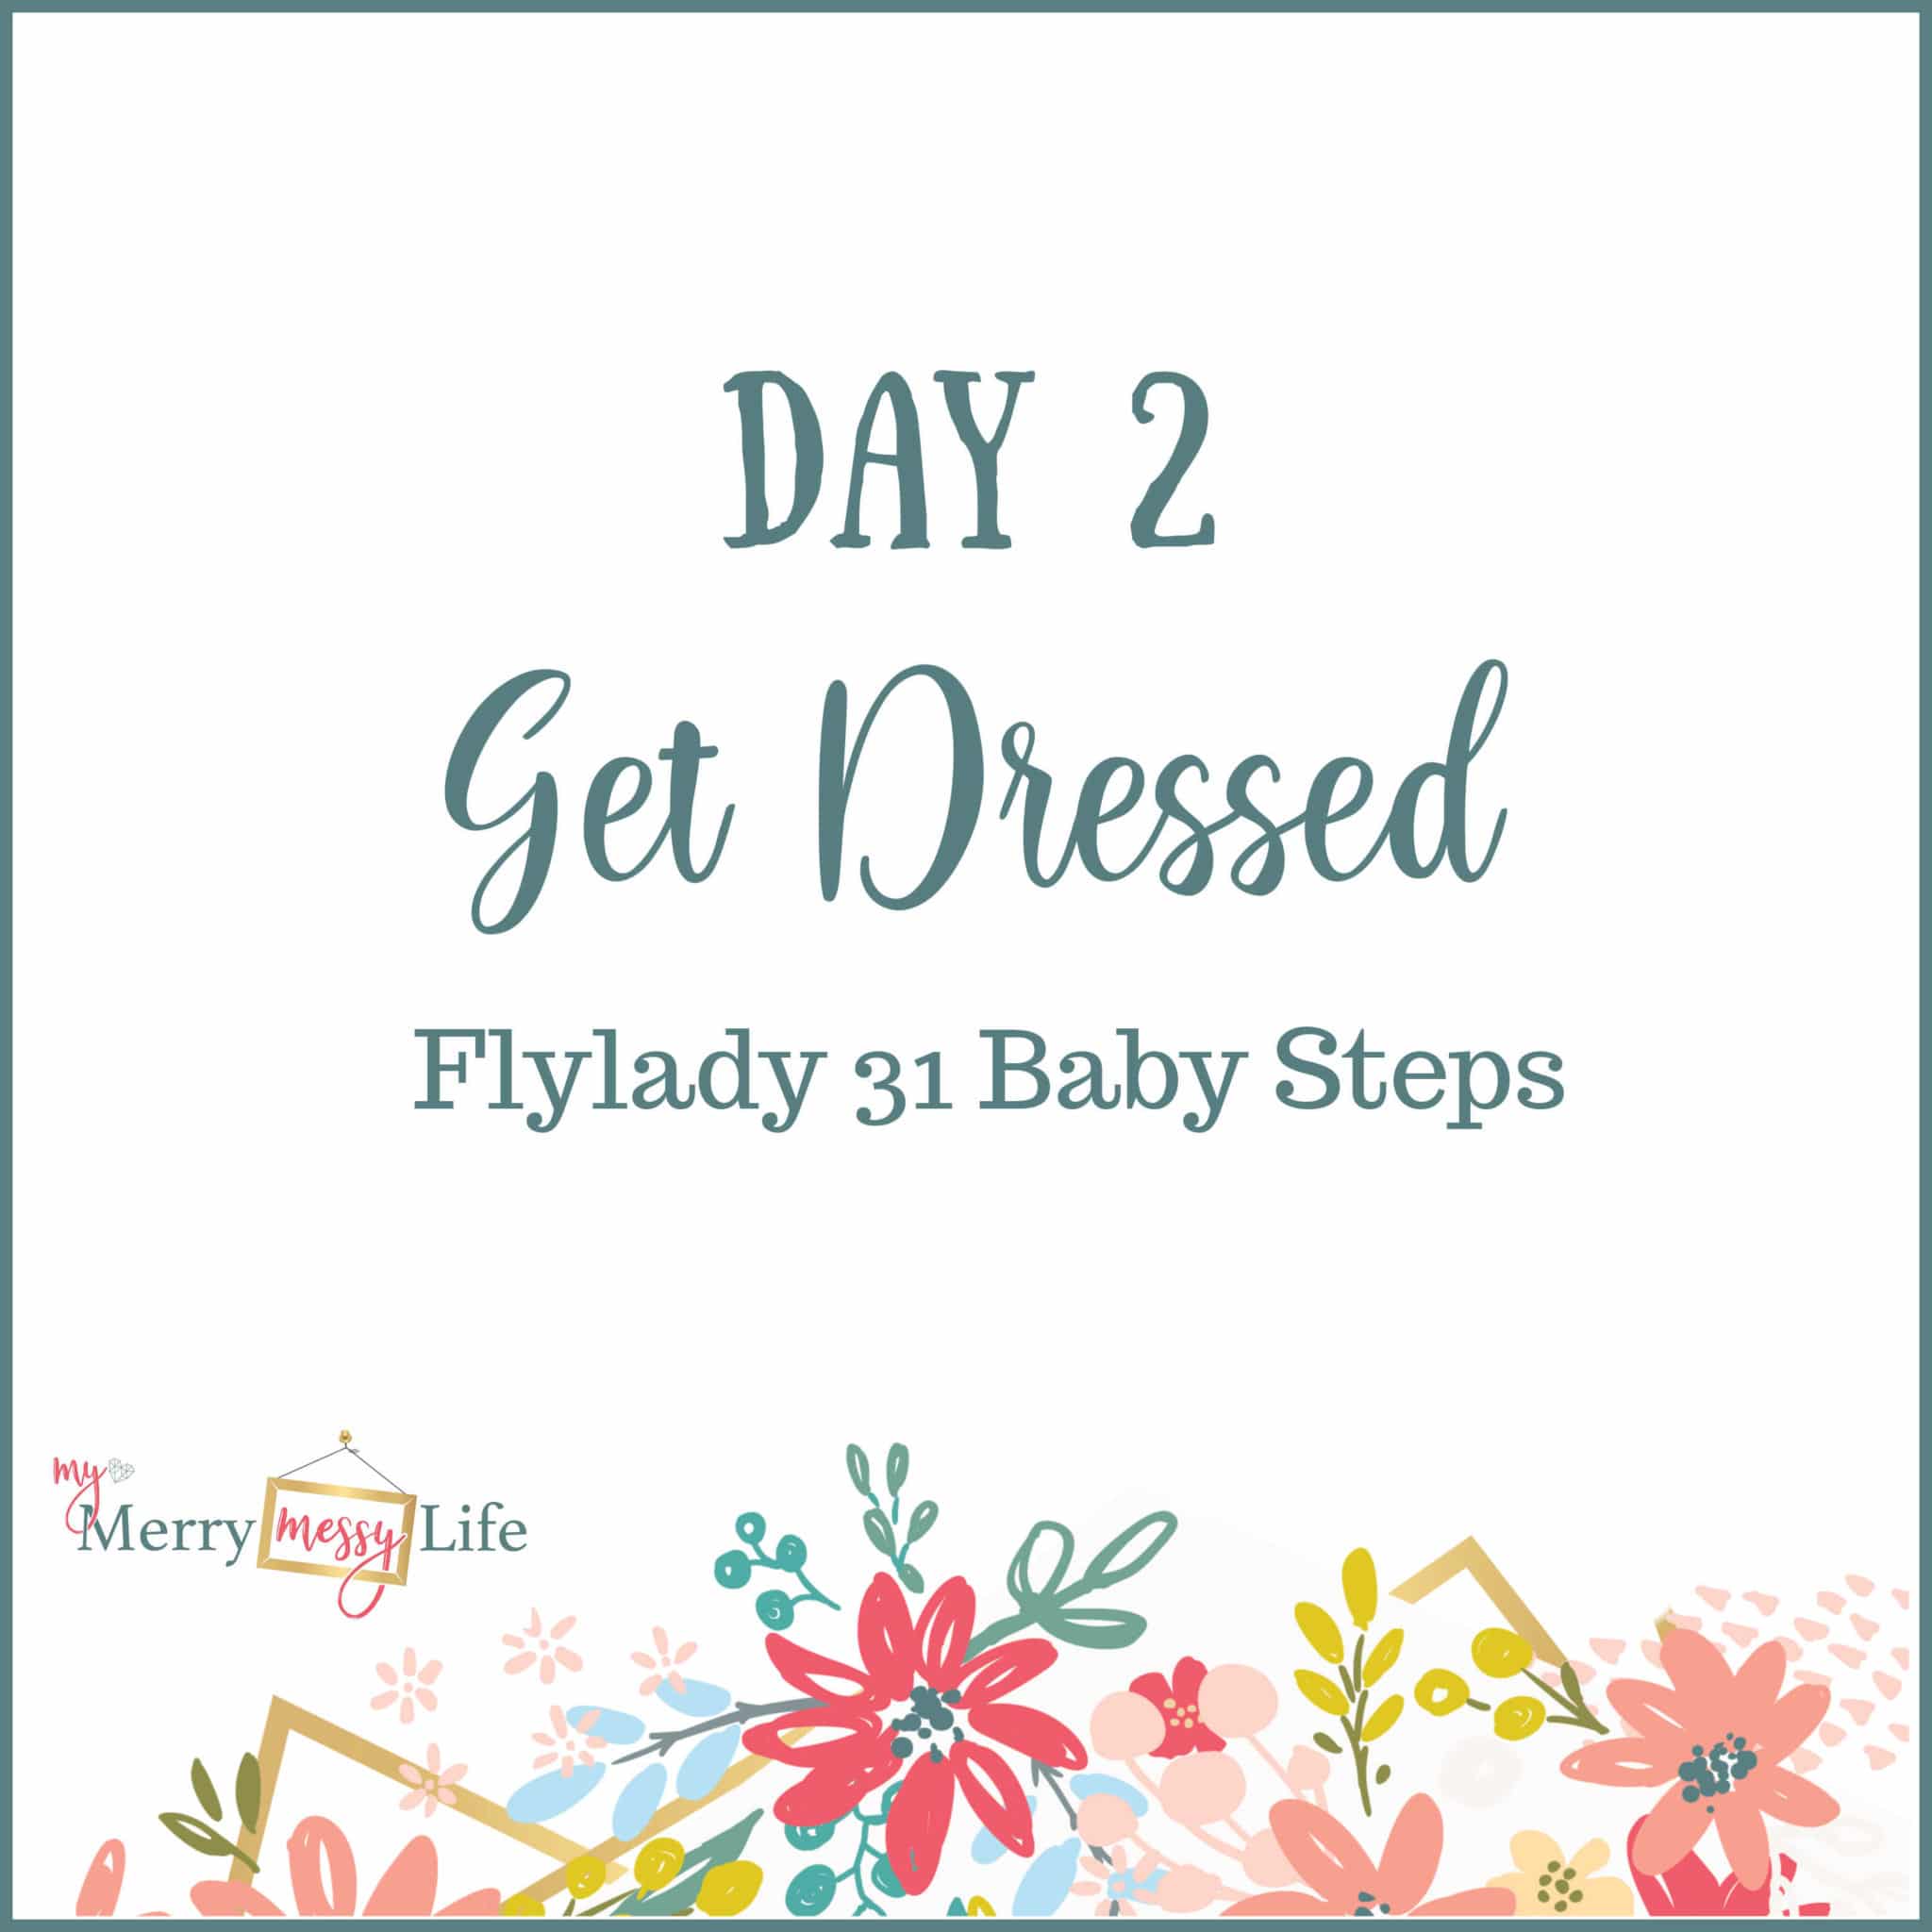 Flylady 31 Baby Steps - Get Dressed to Shoes